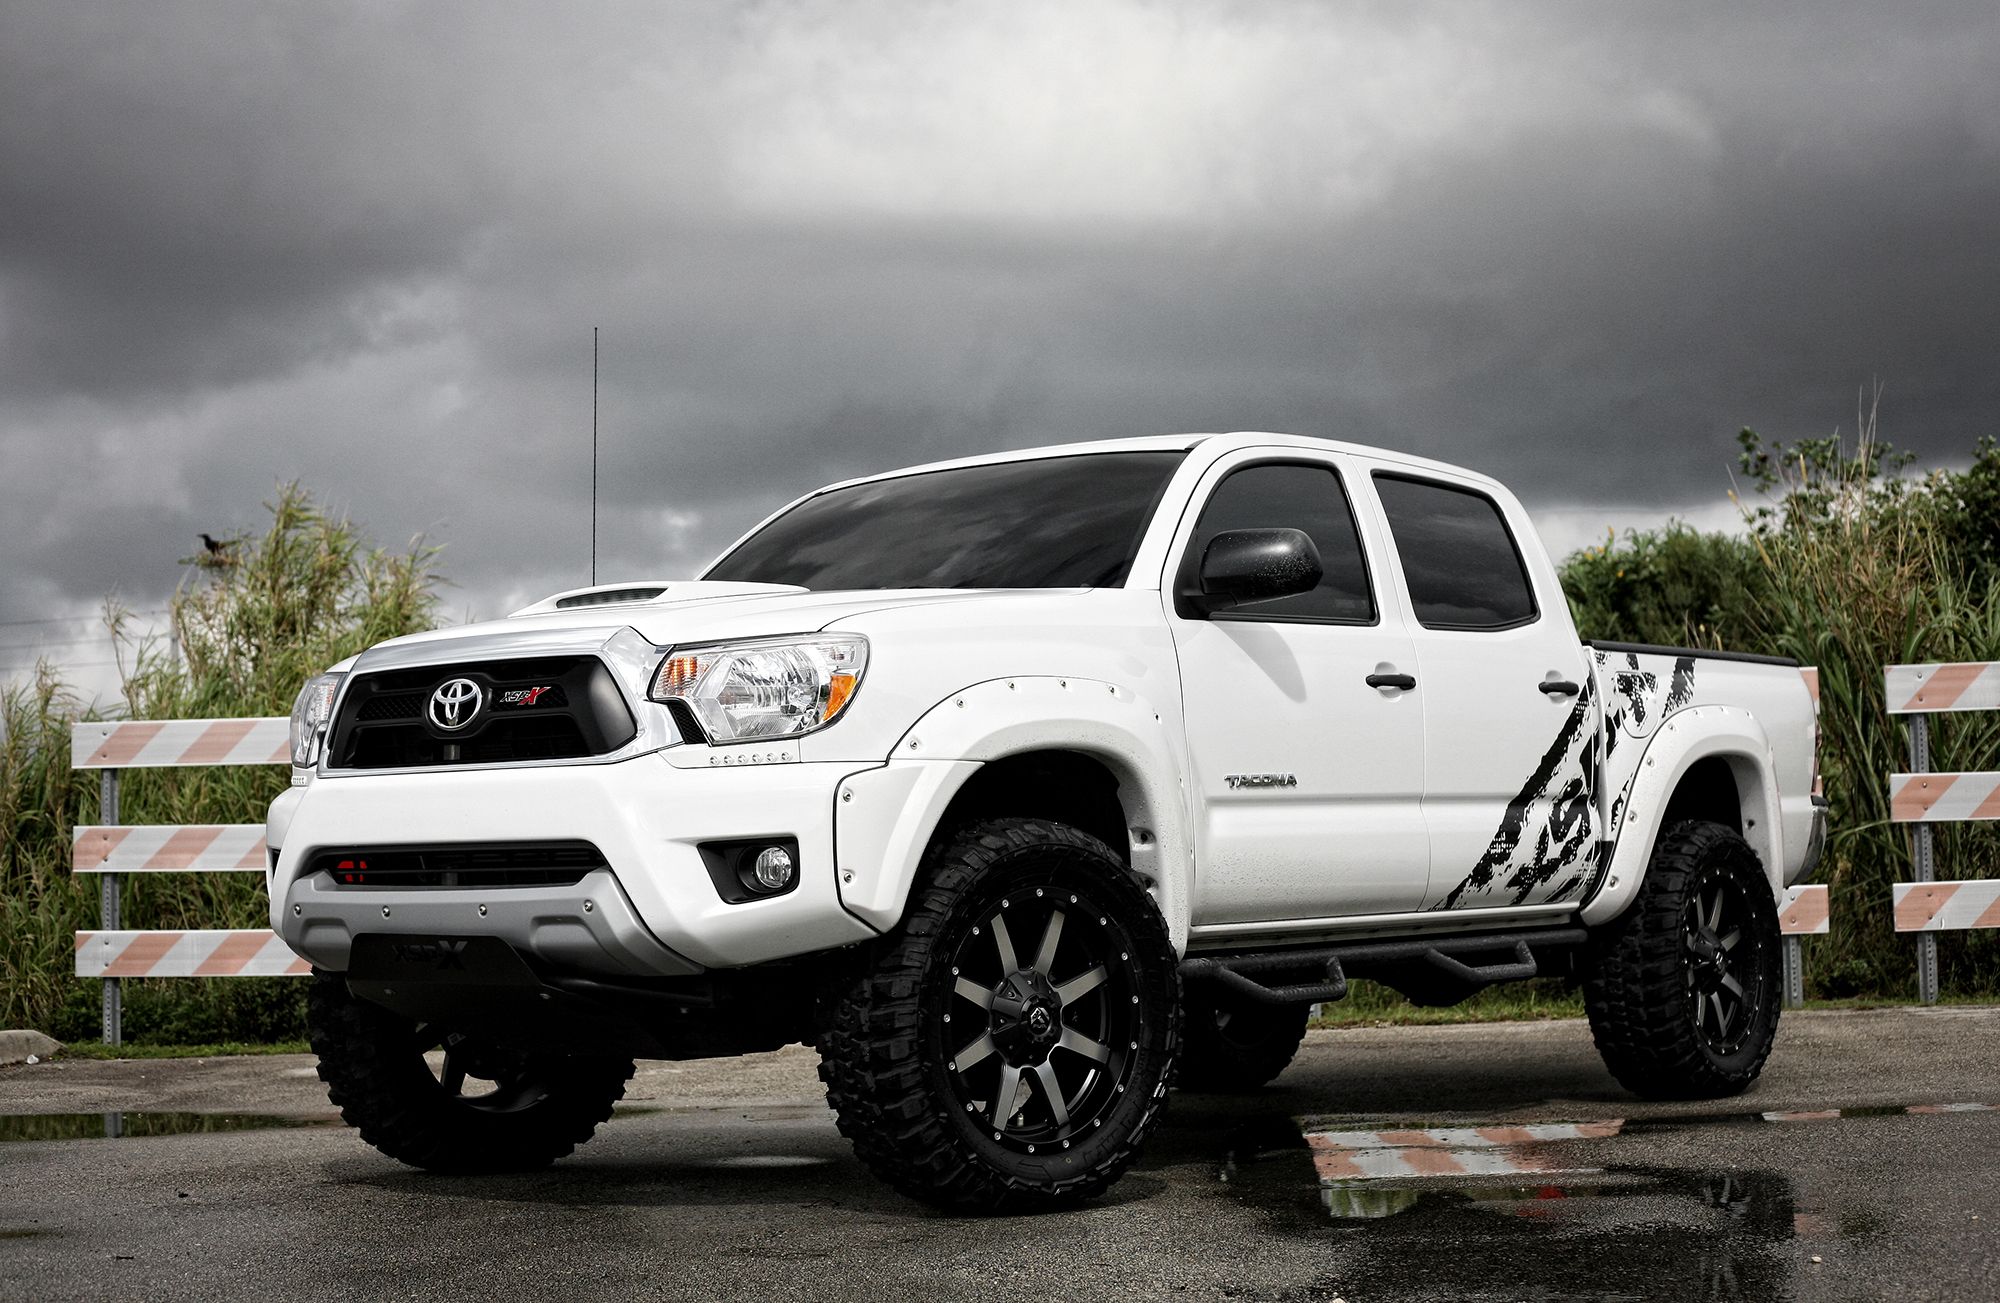 Toyota Tacoma Redesign Free Cool Wallpapers in HD New Car